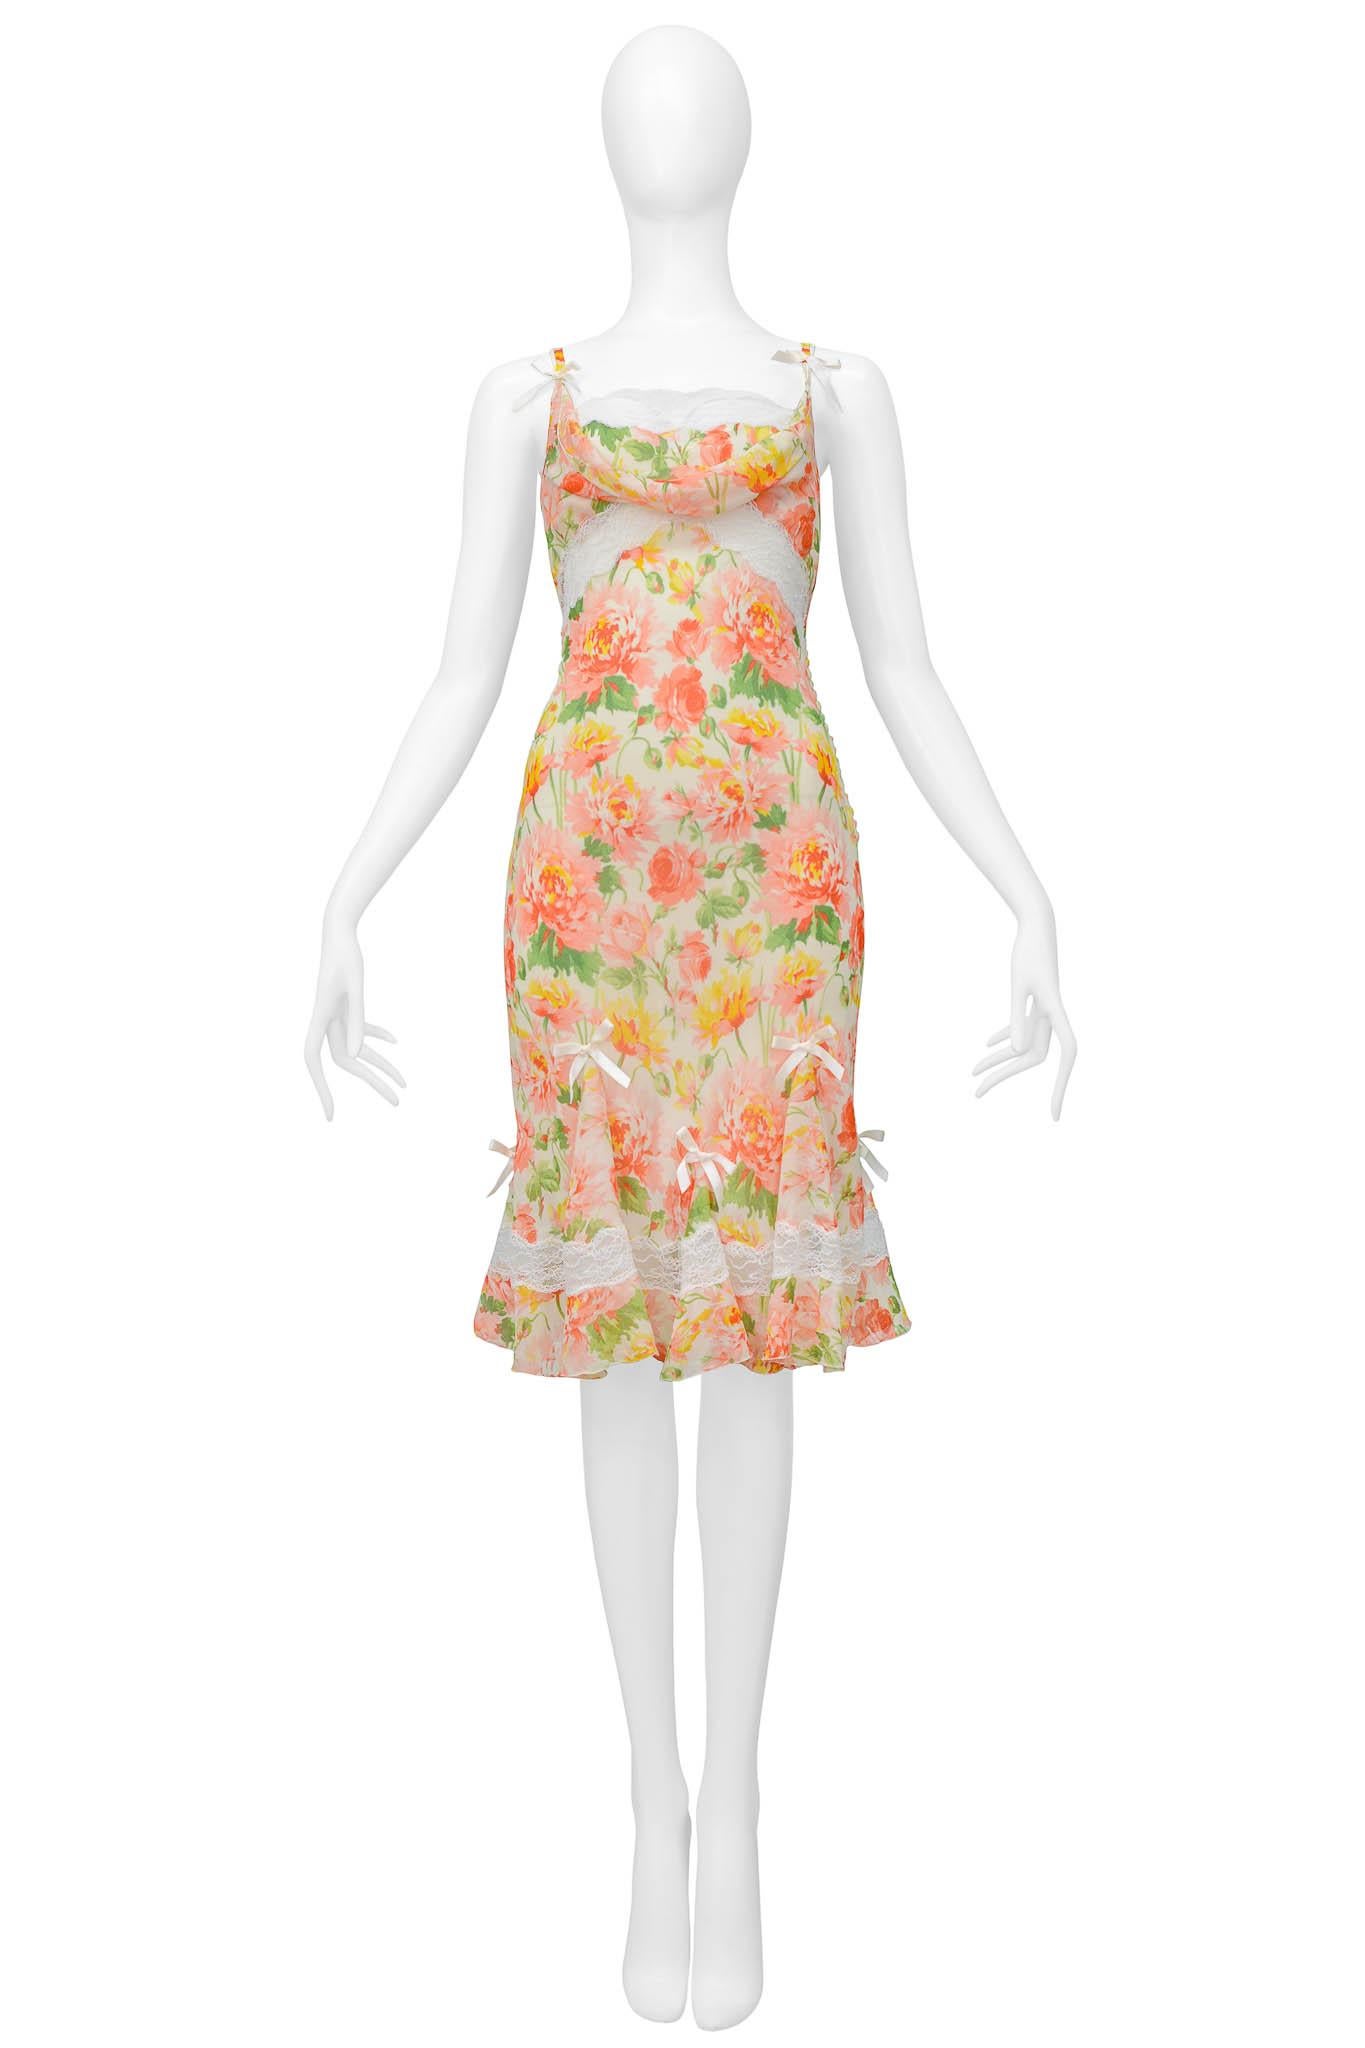 Resurrection Vintage is excited to offer a vintage Christian Dior silk floral dress featuring white lace, inset ruffles along the hem, satin bows, and an attached off-white slip dress under the dress.

Christian Dior
Designed by John Galliano
By